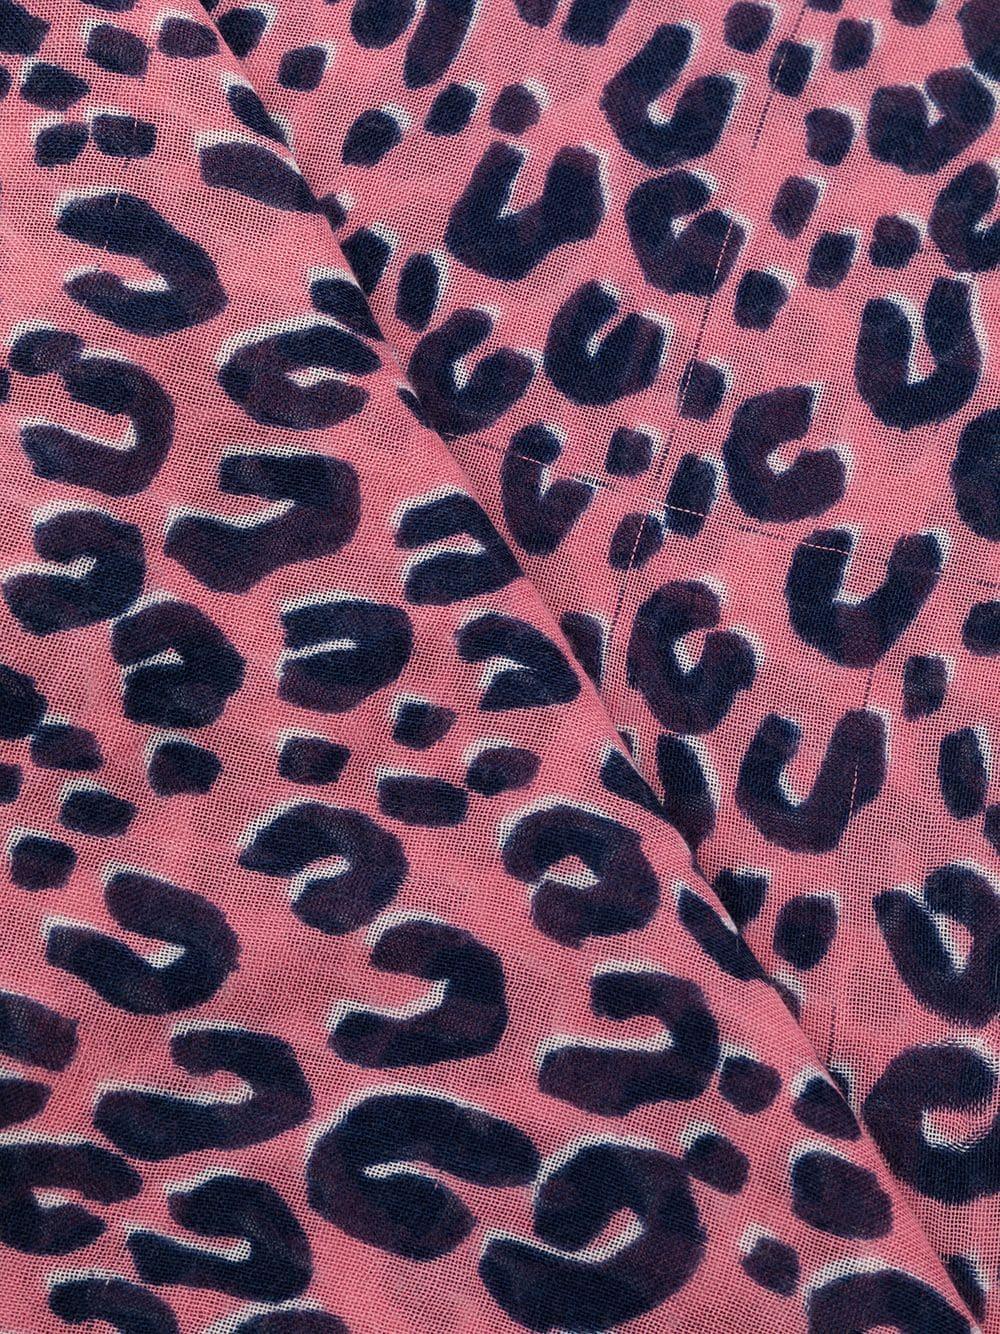 This eye-catching pink leopard scarf features the signature Stephen Sprouse graffiti Louis Vuitton logo. Made of 100% silk, this scarf will spice up any outfit.

Colour: Pink/Navy

Composition: Cashmere 70%, Silk 30%

Measurements: Length 200 cm,